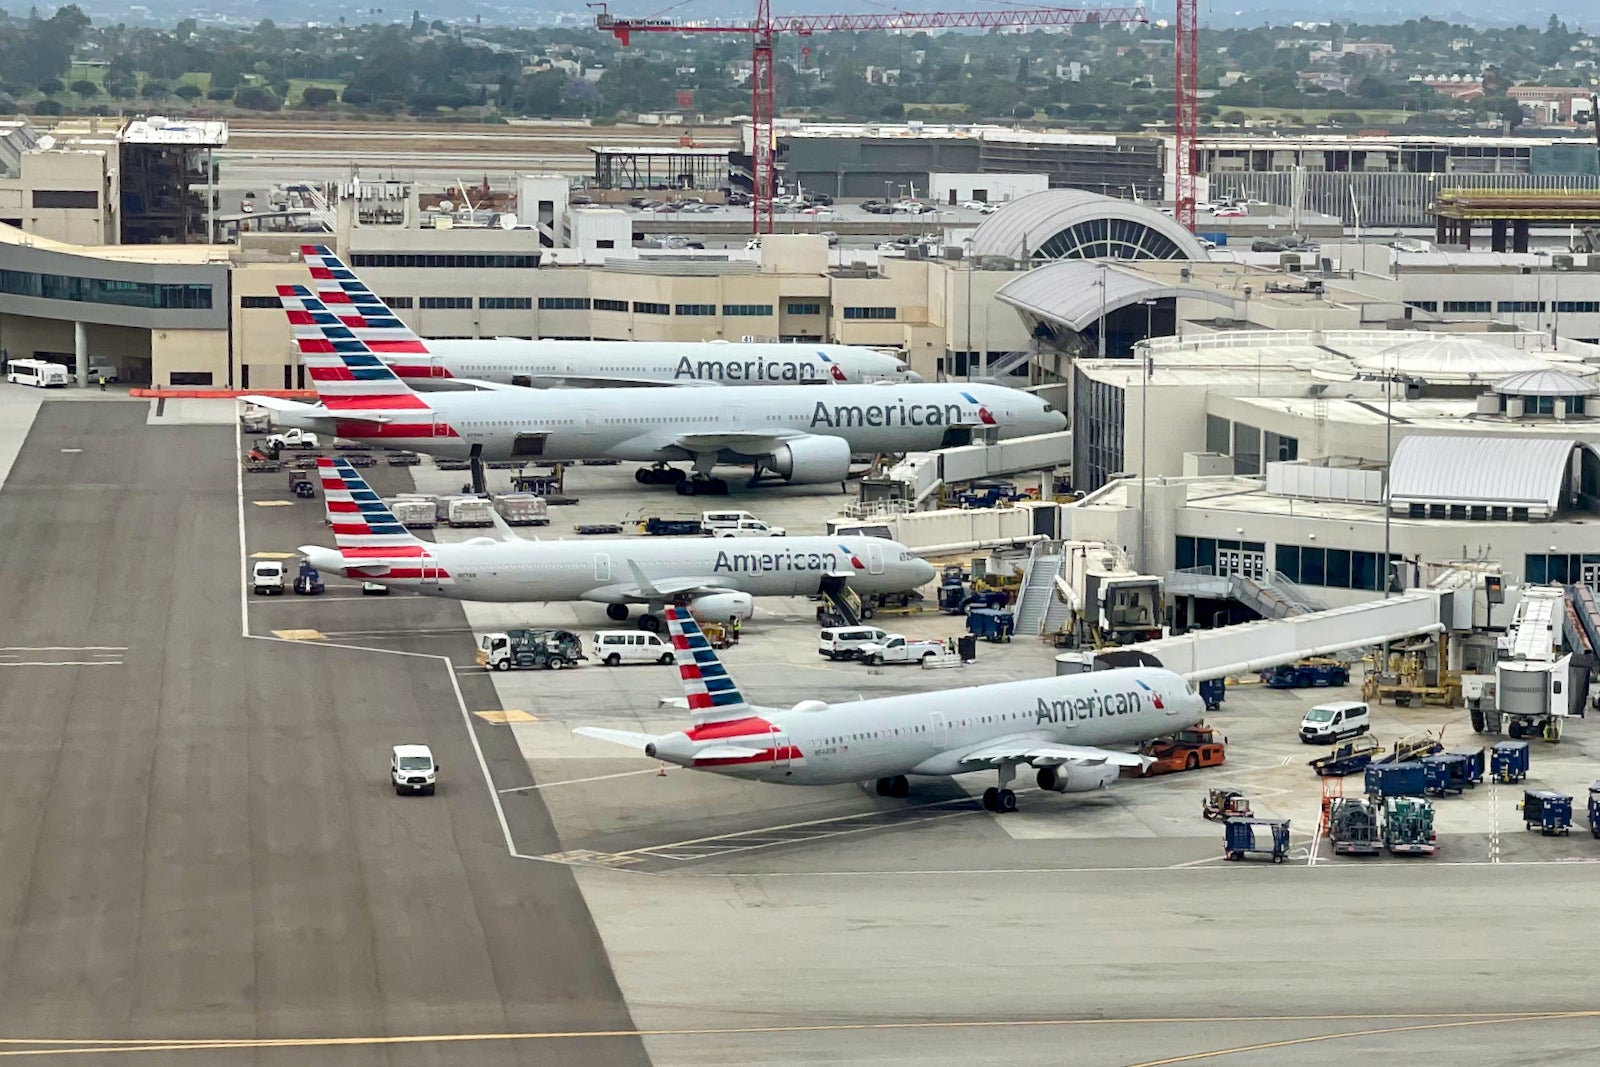 American Airlines just added wide-body planes to hundreds more domestic flights - The Points Guy